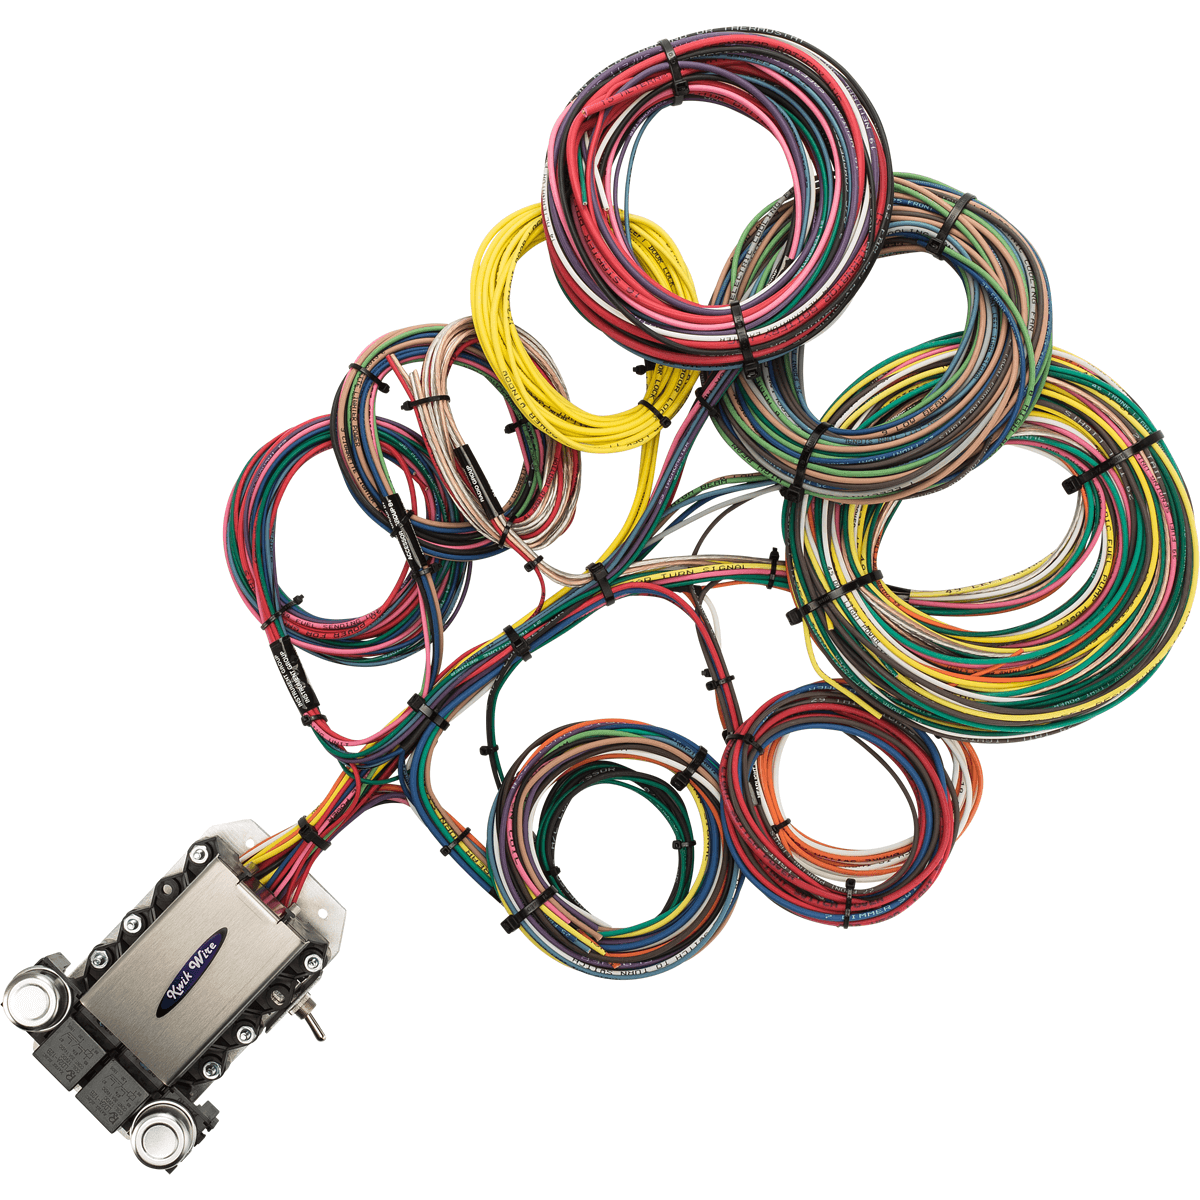 20 Circuit Ford Wire Harness